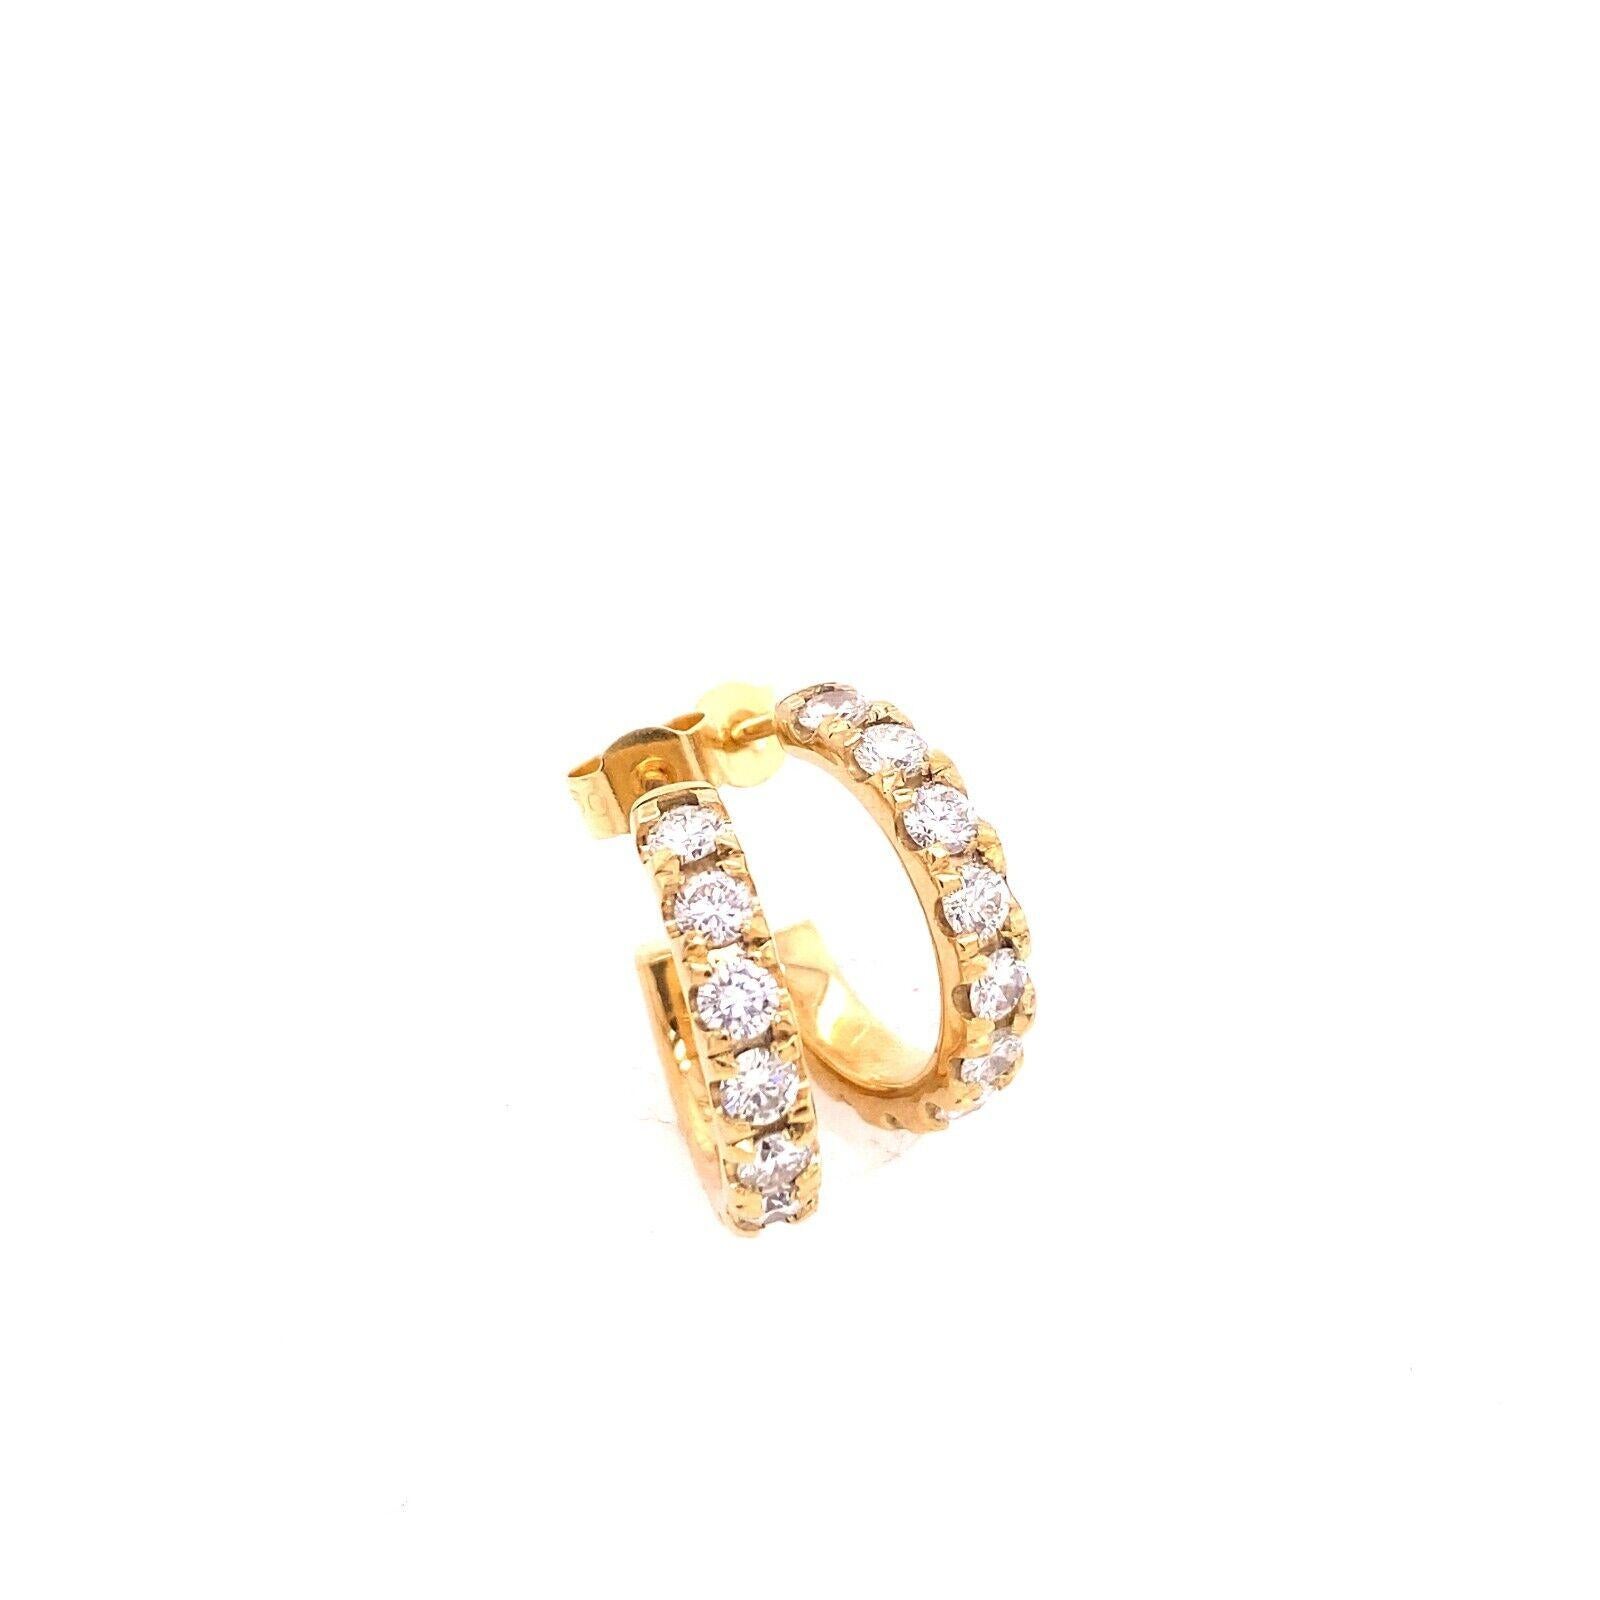 This pair of  hoop earrings was designed to be the perfect everyday earring. 
It features 11 round brilliant cut Diamonds on each earring  mounted on a 14ct Yellow Gold hoop. 

Additional Information: 
Total Weight: 4.2g 
Total Diamond Weight: